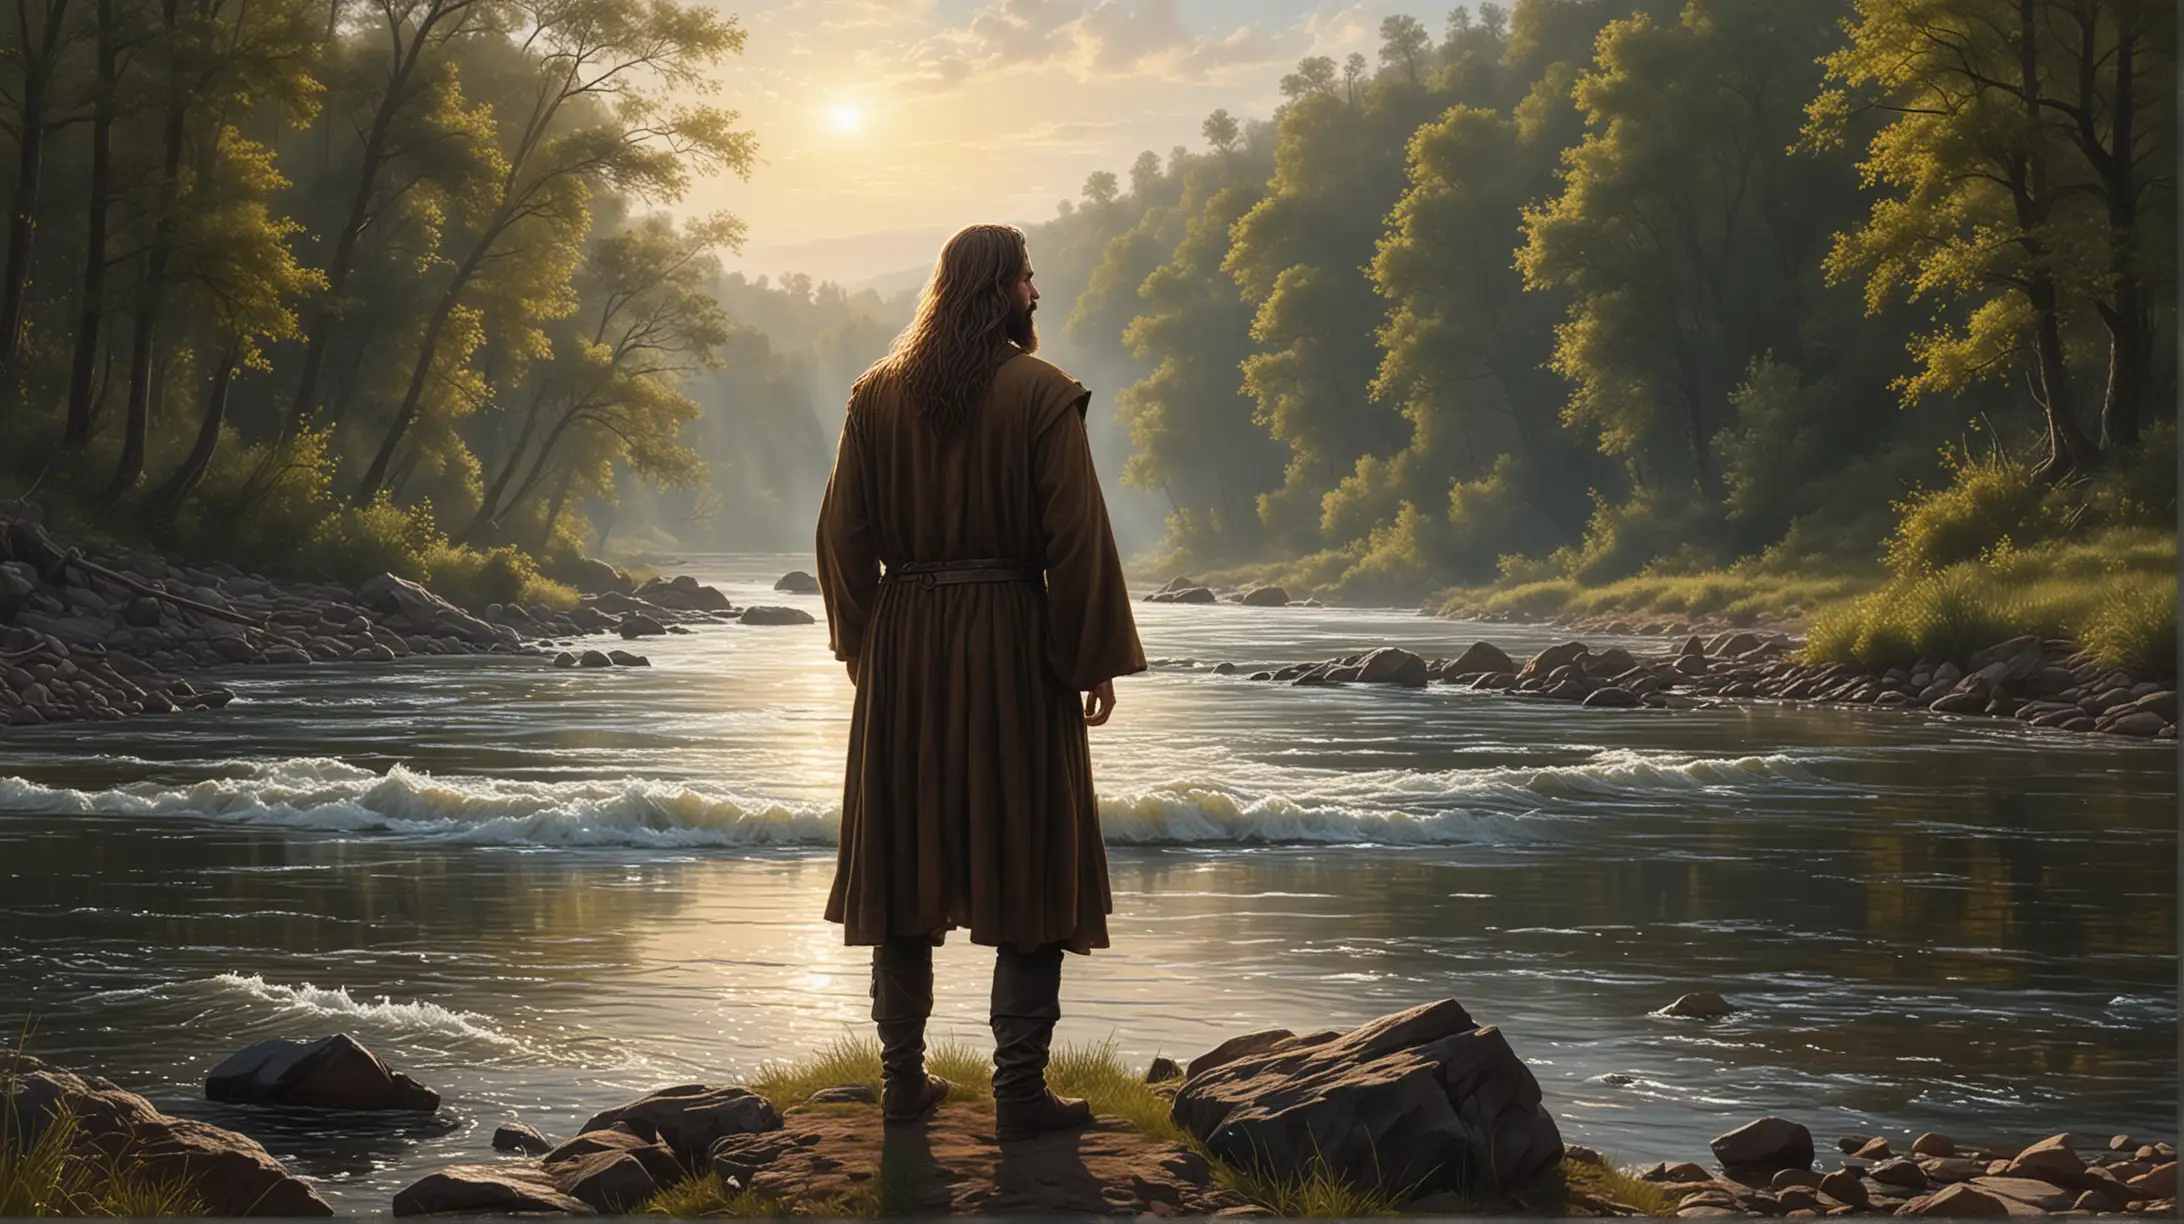 LongHaired Bearded Man Standing Vigilantly by a Serene River Prophetic and Biblical Art Fusion